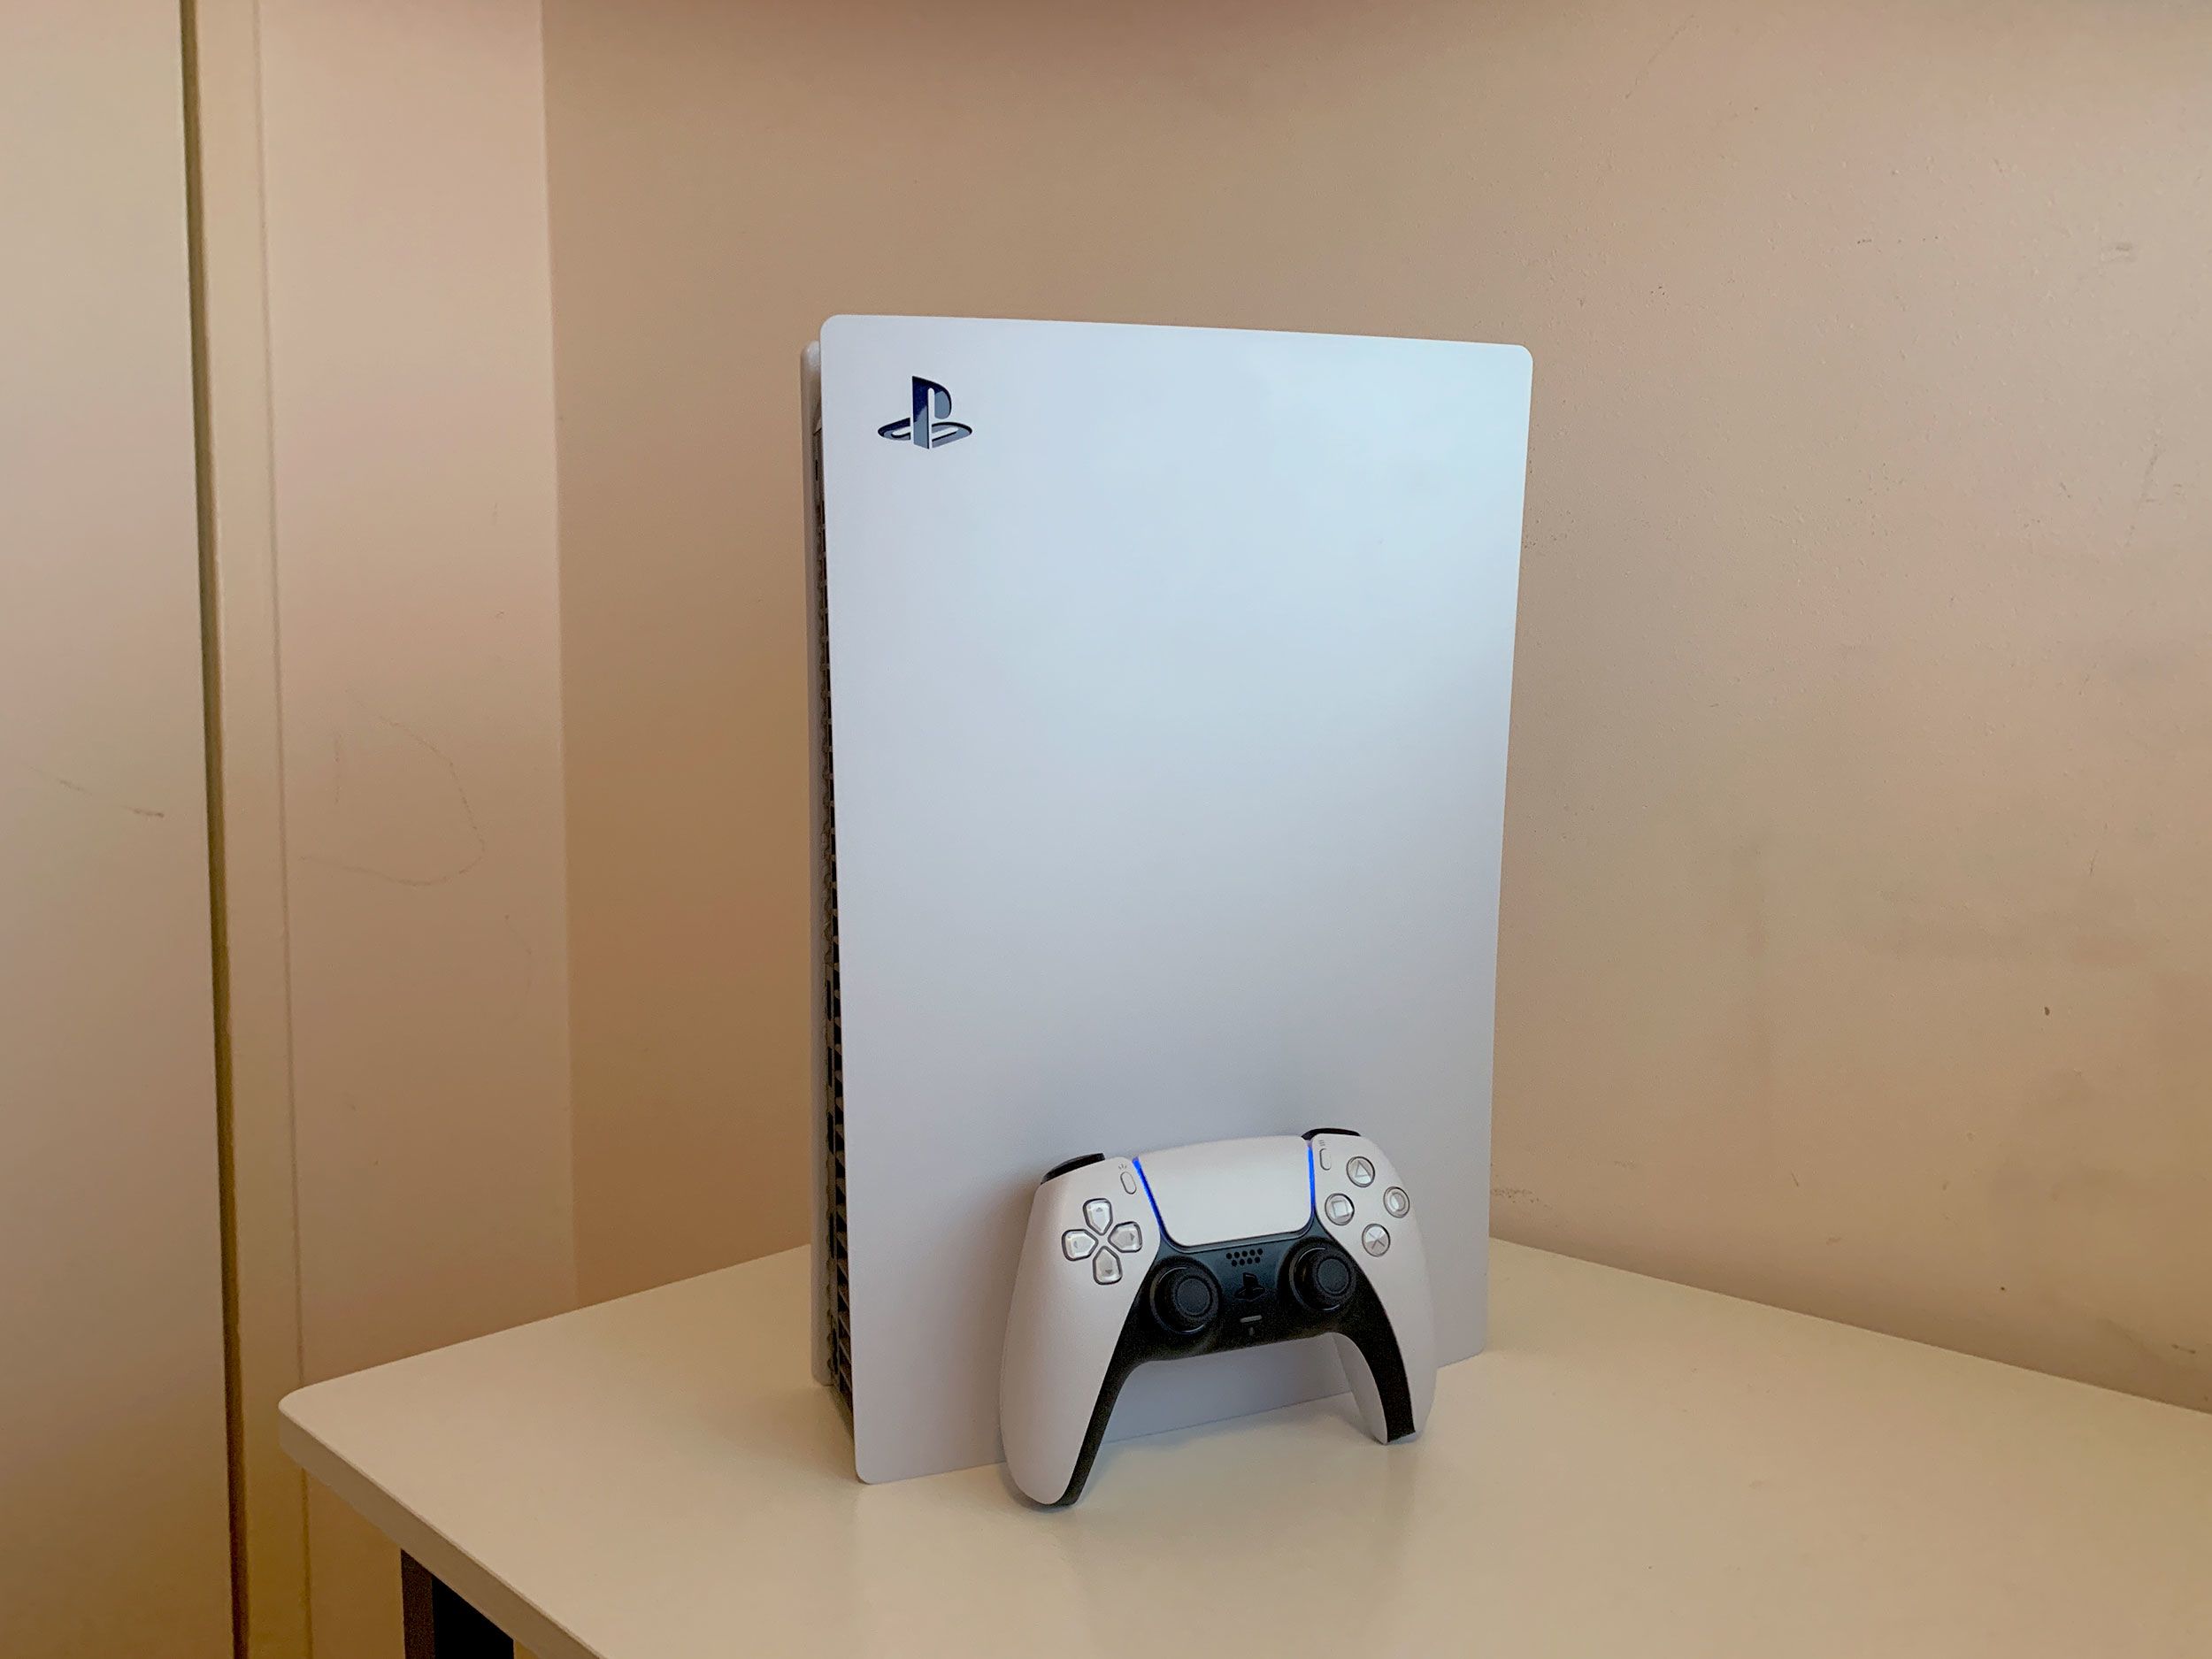 PlayStation 5 review